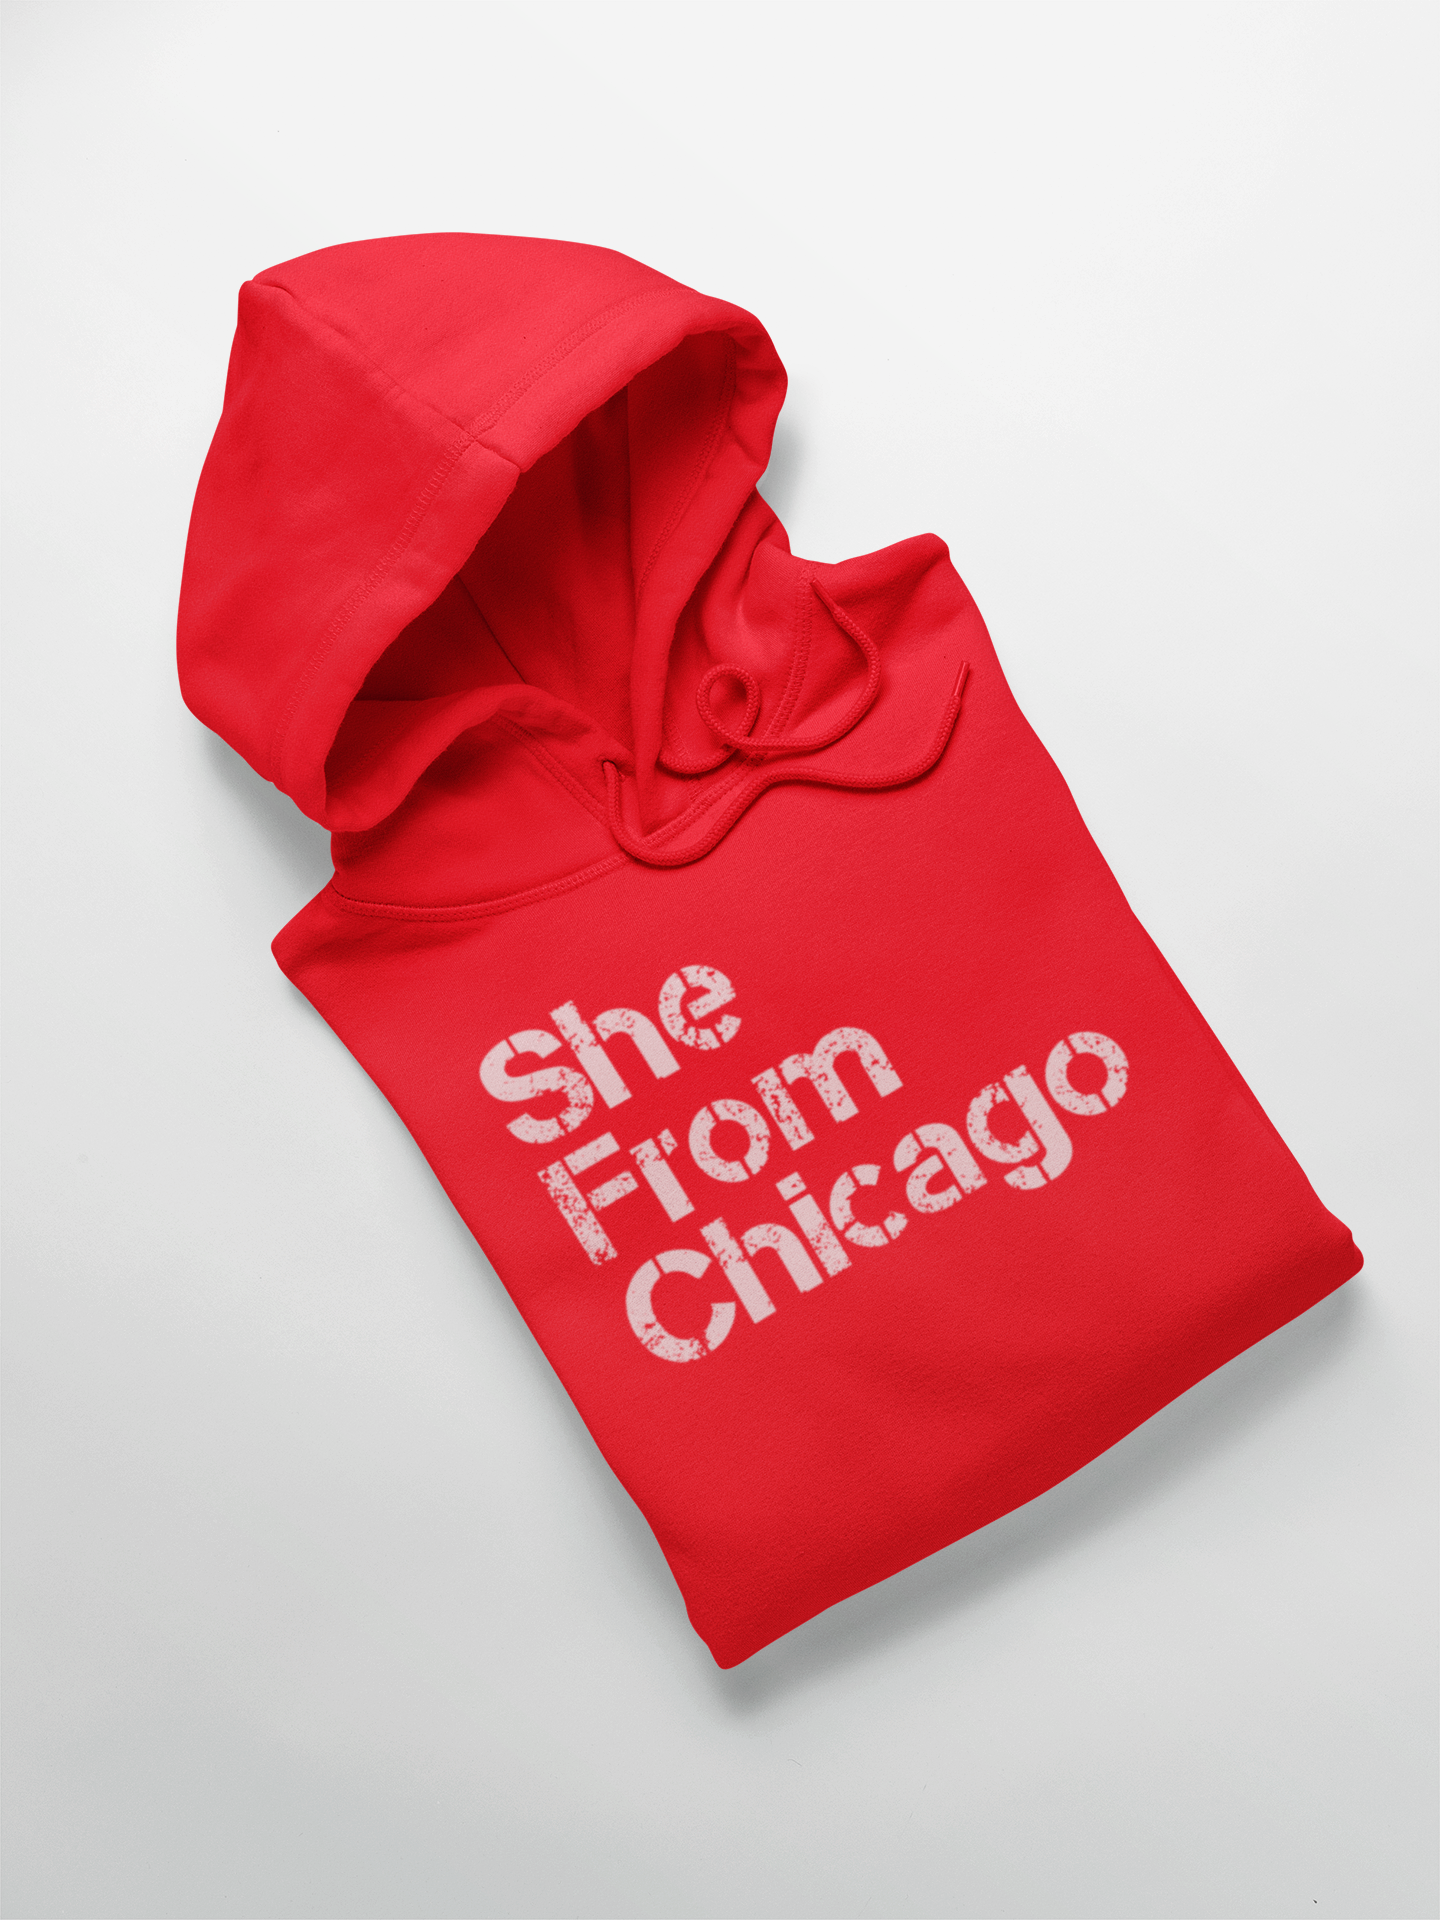 She From Chicago Hoodie